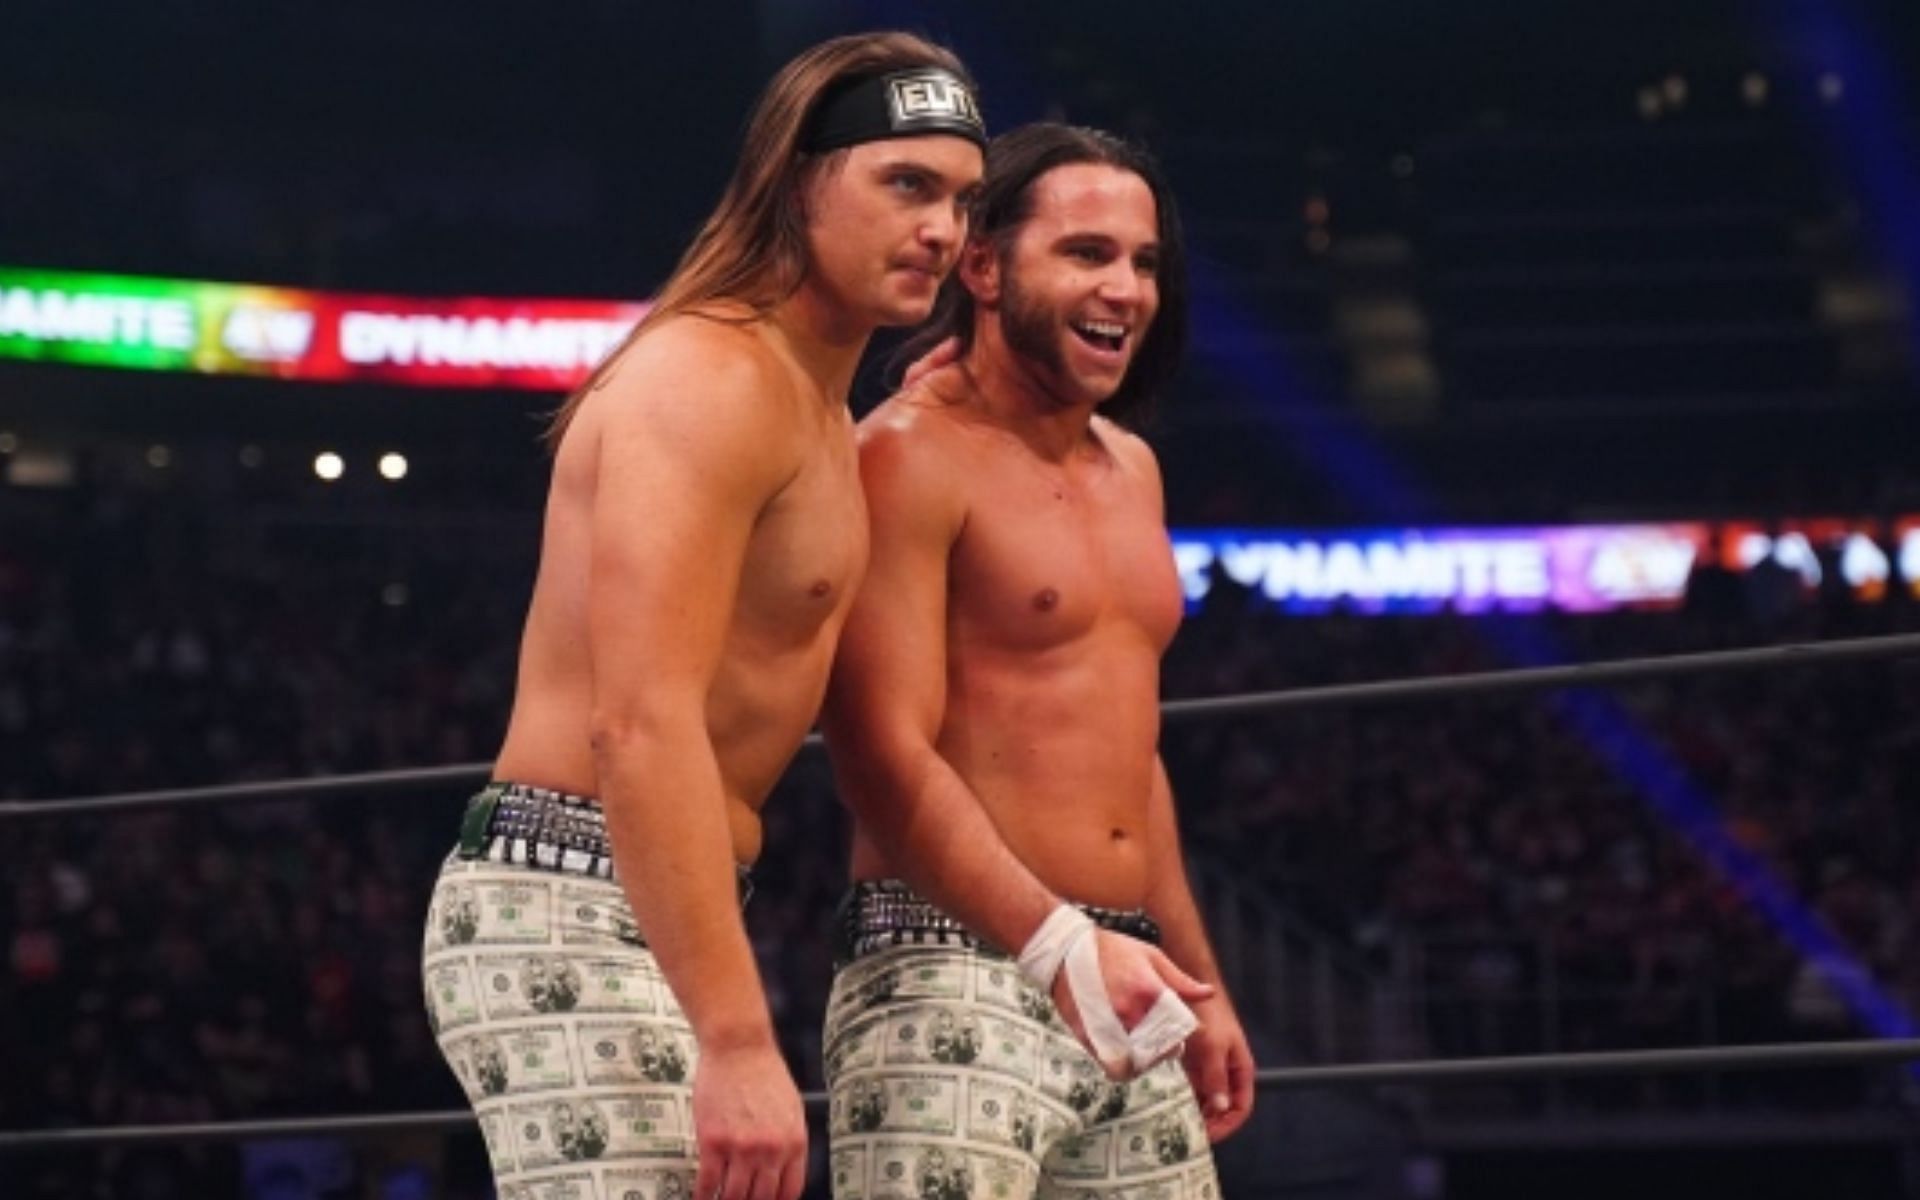 The Young Bucks were victorious earlier on AEW Dynamite.